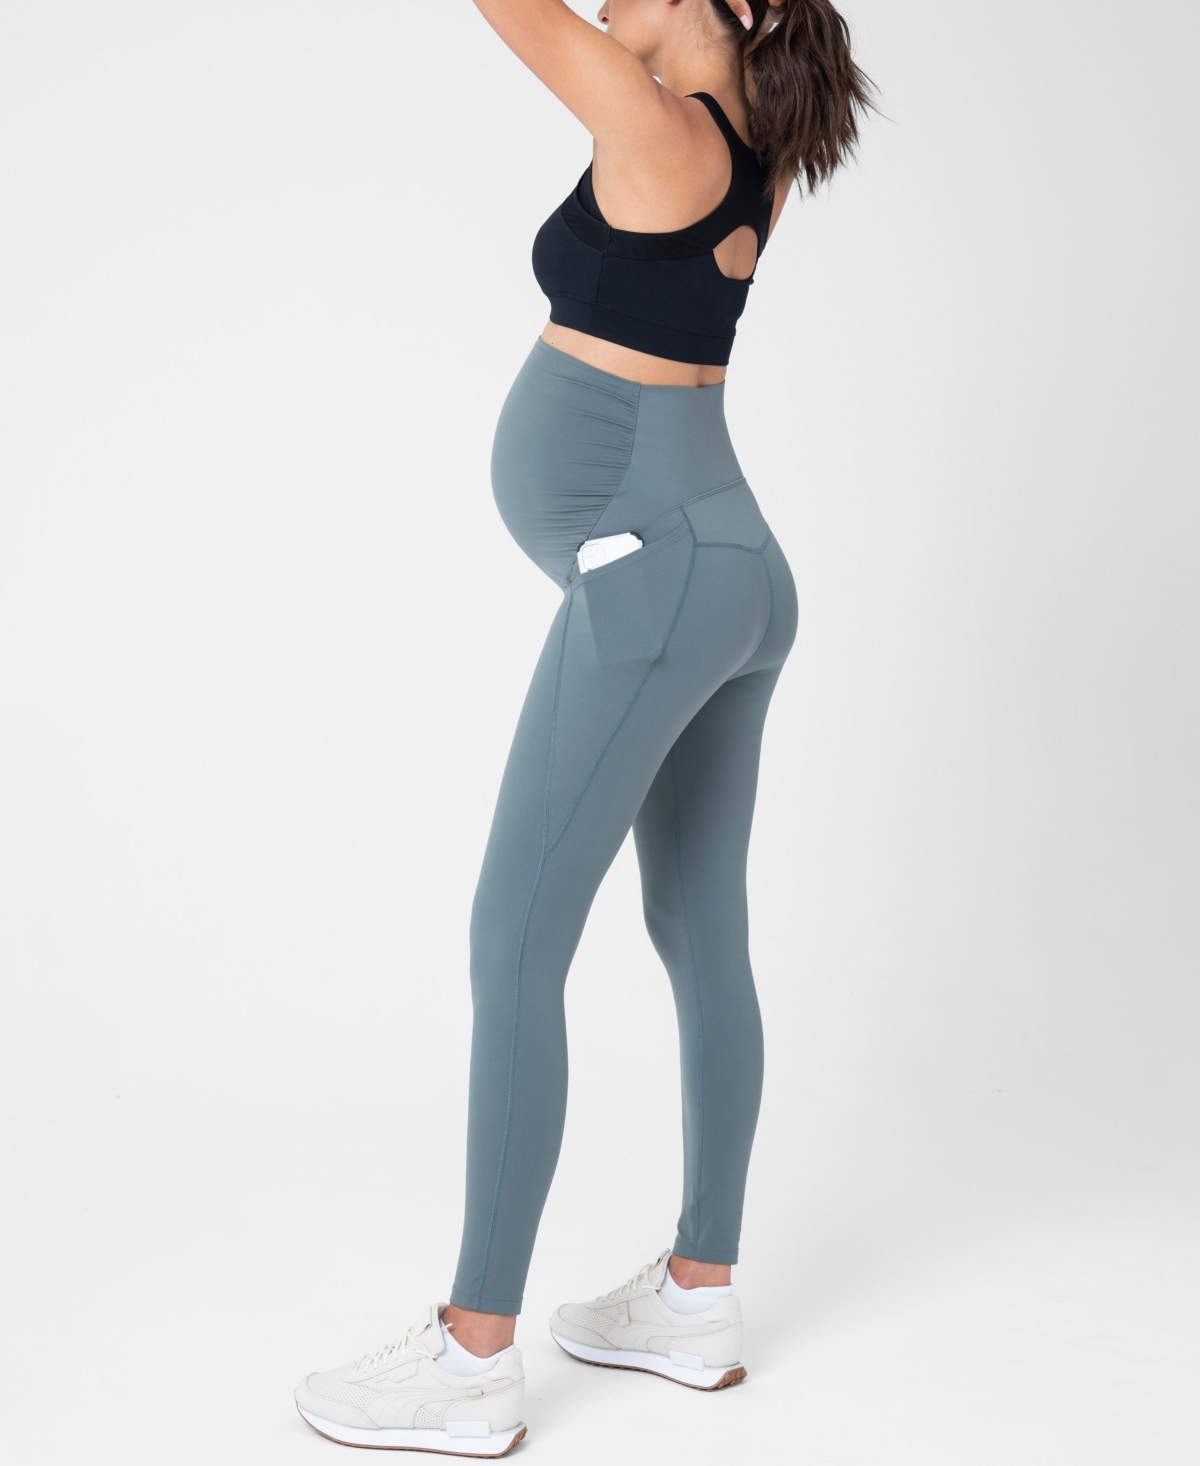 Shop Seraphine Women's Active Support Soft-touch Sage Maternity Leggings In Black